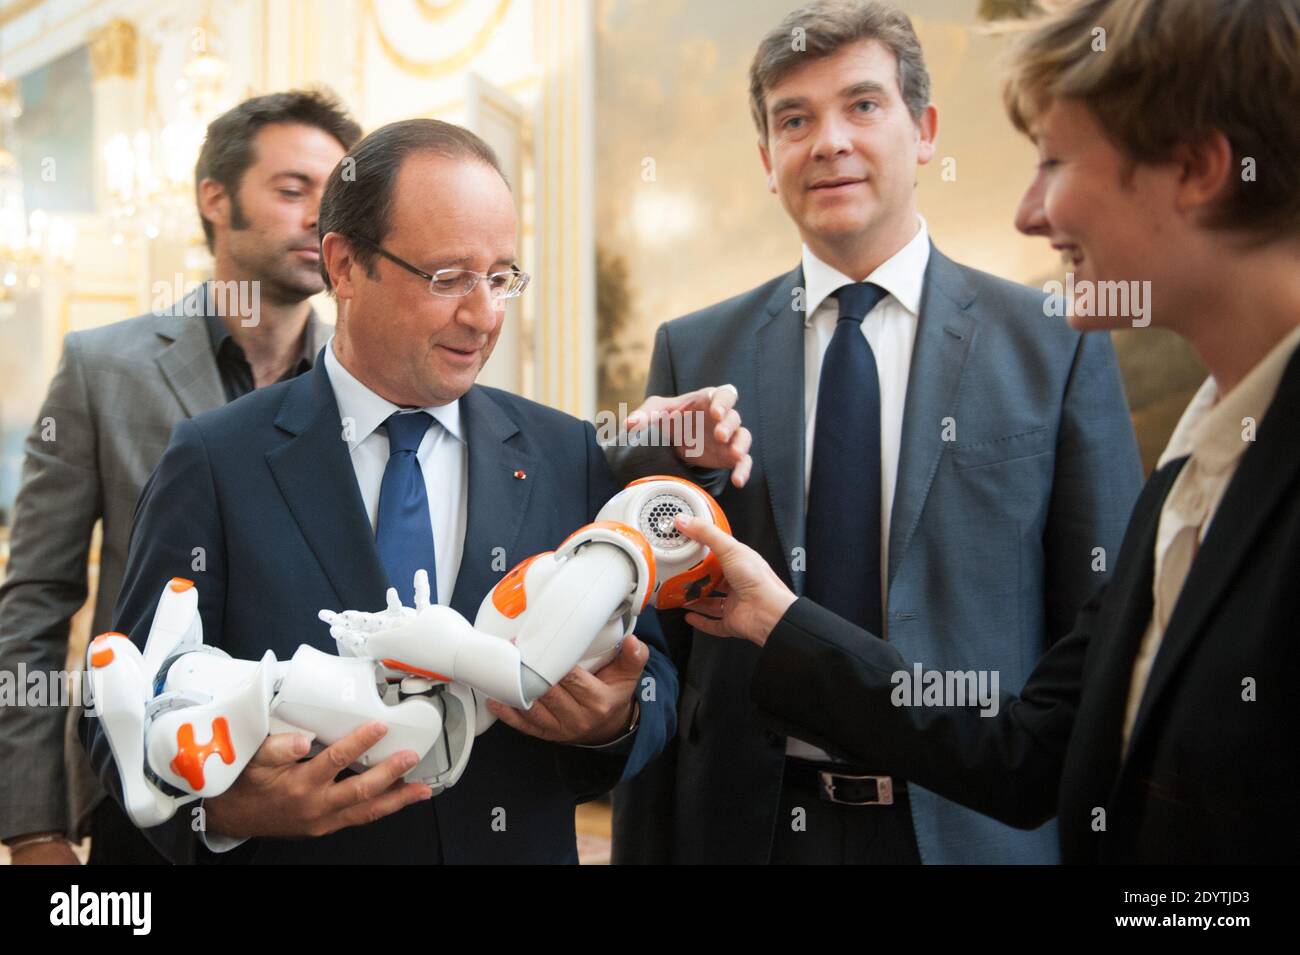 France's President Francois Hollande holds an humanoid robot 'Nao' from Aldebaran Robotics company as he visits an exhibition on French industrial design and technology at the Elysee Palace in Paris, France on September 12, 2013. At R, French Minister for Industrial Recovery Arnaud Montebourg. Photo by Thierry Orban/ABACAPRESS.COM Stock Photo